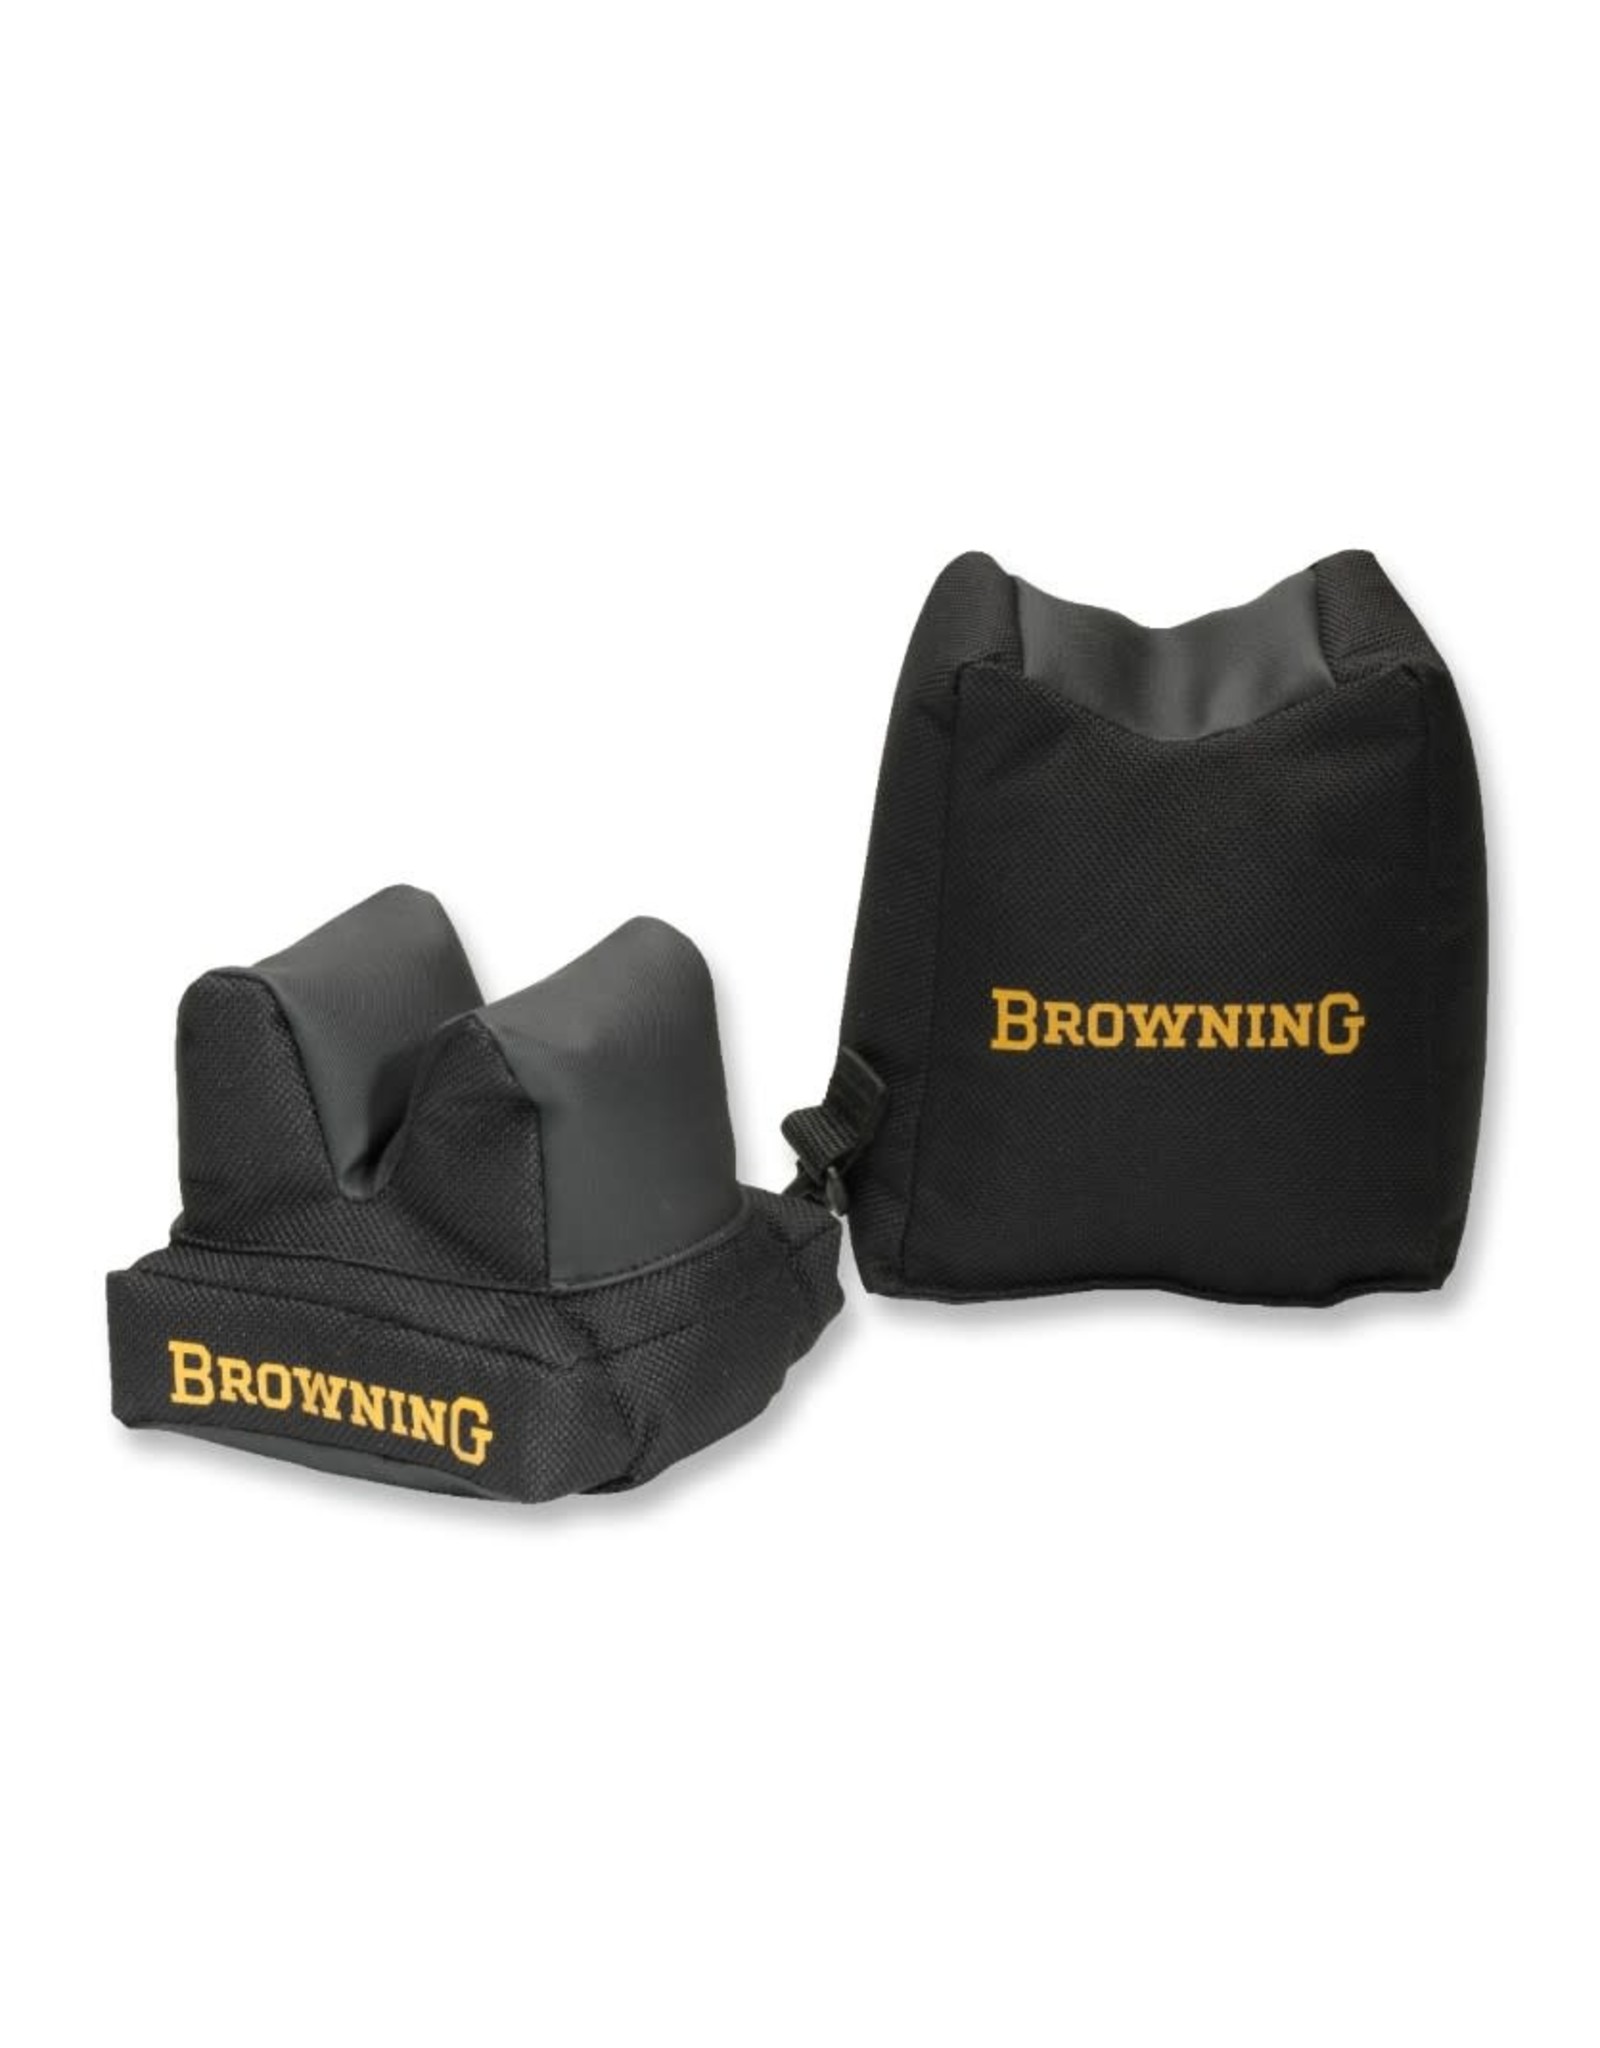 Browning Browning MOA Two-Piece Shooting Rest